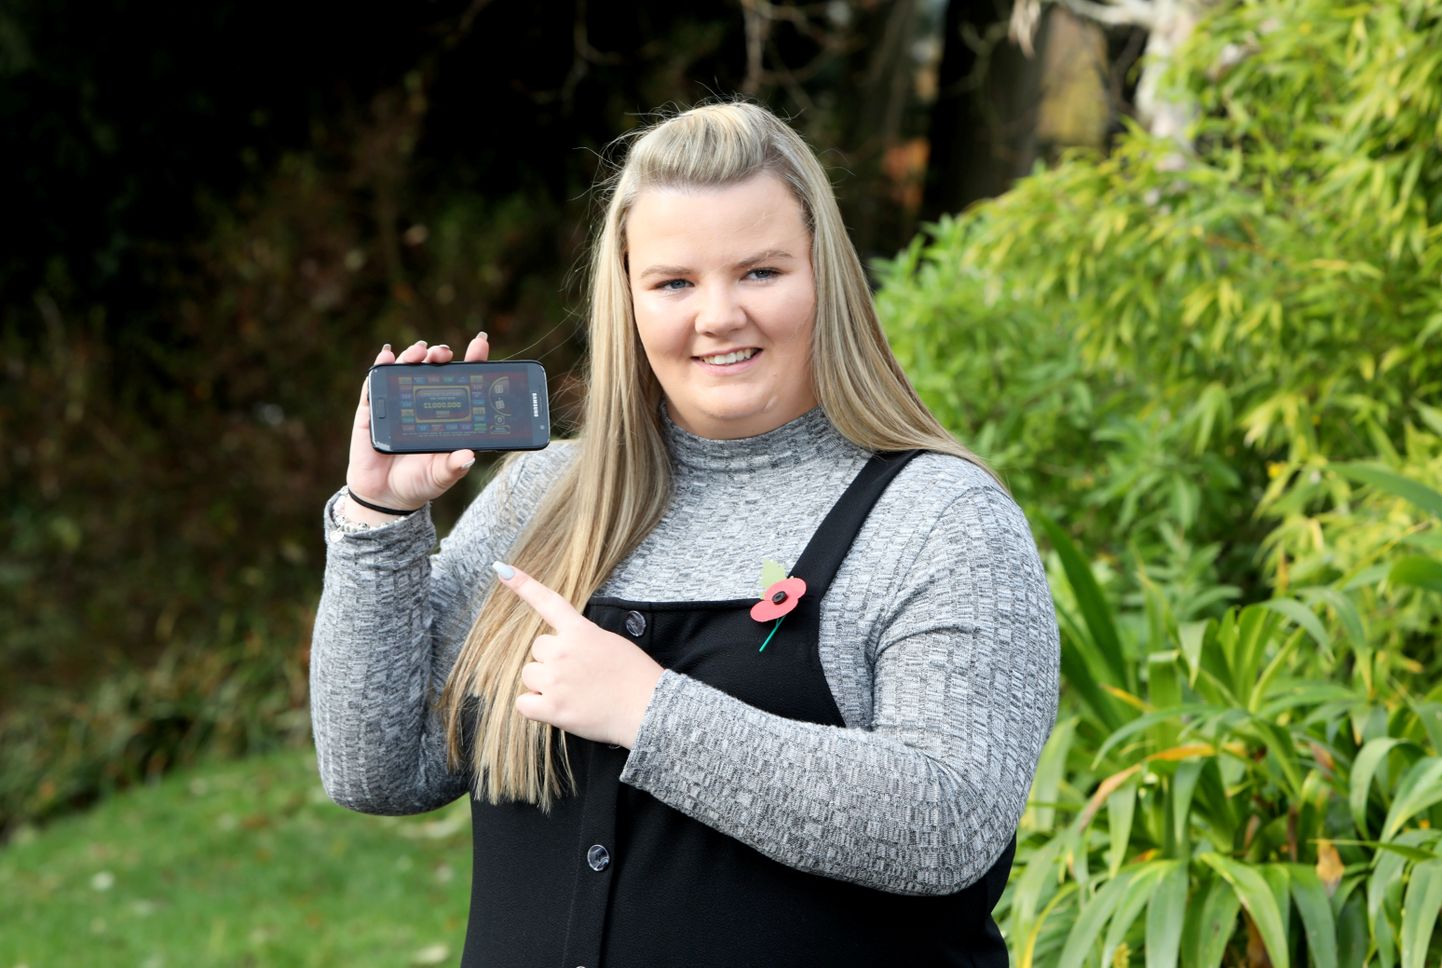 Jodie Scullion, recieves her £1 million cheque at the Botanical Gardens, Birmingham.  November 8, 2019.  A bank worker had a lotto beginner’s luck when she won £1million the first time she played an online game – while killing time on a "boring" caravan holiday. See SWNS story SWMDlotto.  Jodie Scullion, 38, was sitting in her caravan on a wet campsite in Somerset when she decided to play an Instant Win Game on her mobile phone.  She paid £5 to play the '£1M Run for Your Money' game on October 28 and scooped the jackpot.   Today (Fri) Jodie, a mortgage underwriter, picked up her mega-cheque at the Birmingham Botanical Gardens.